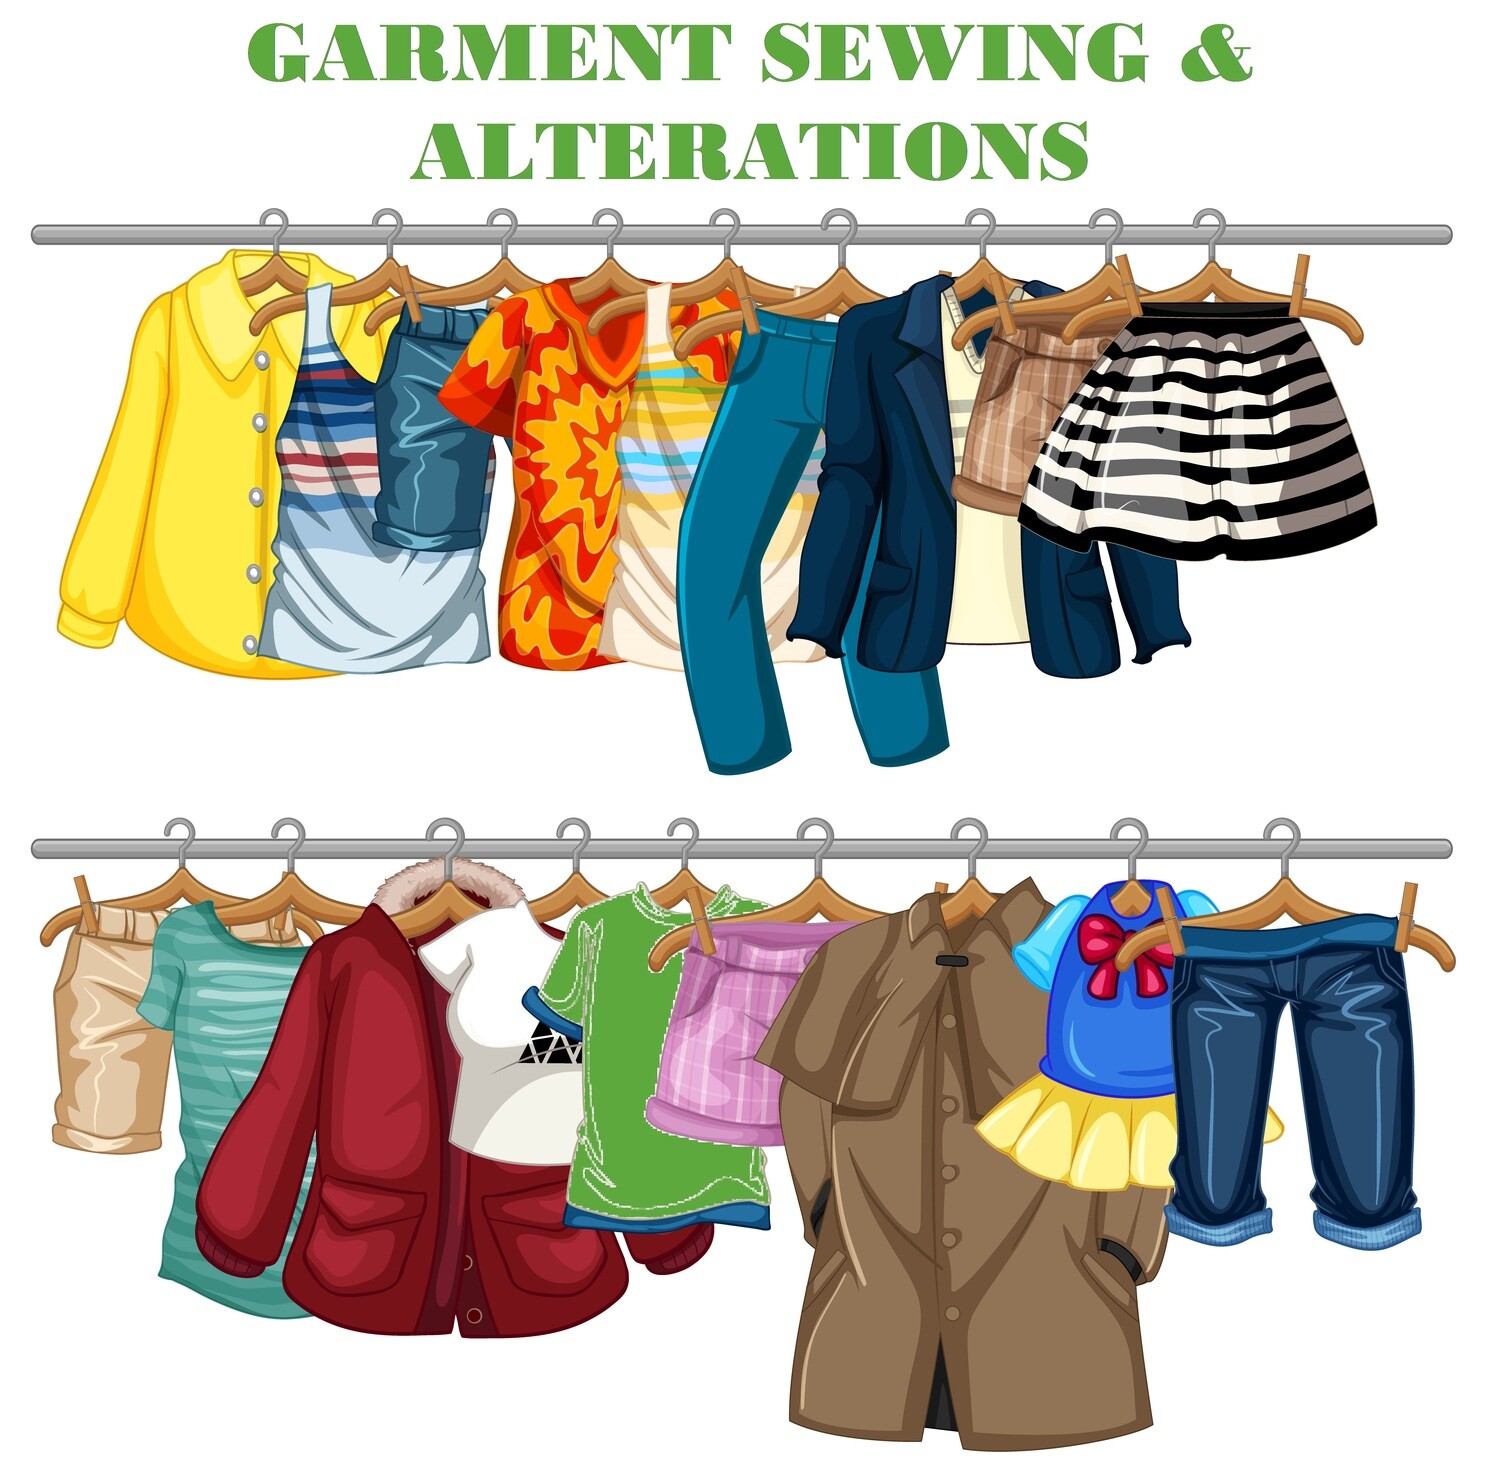 GARMENT SEWING & ALTERATIONS
$50.00 + HST (each)
Saturday January 13th, 10:30 am - 4:30 pm